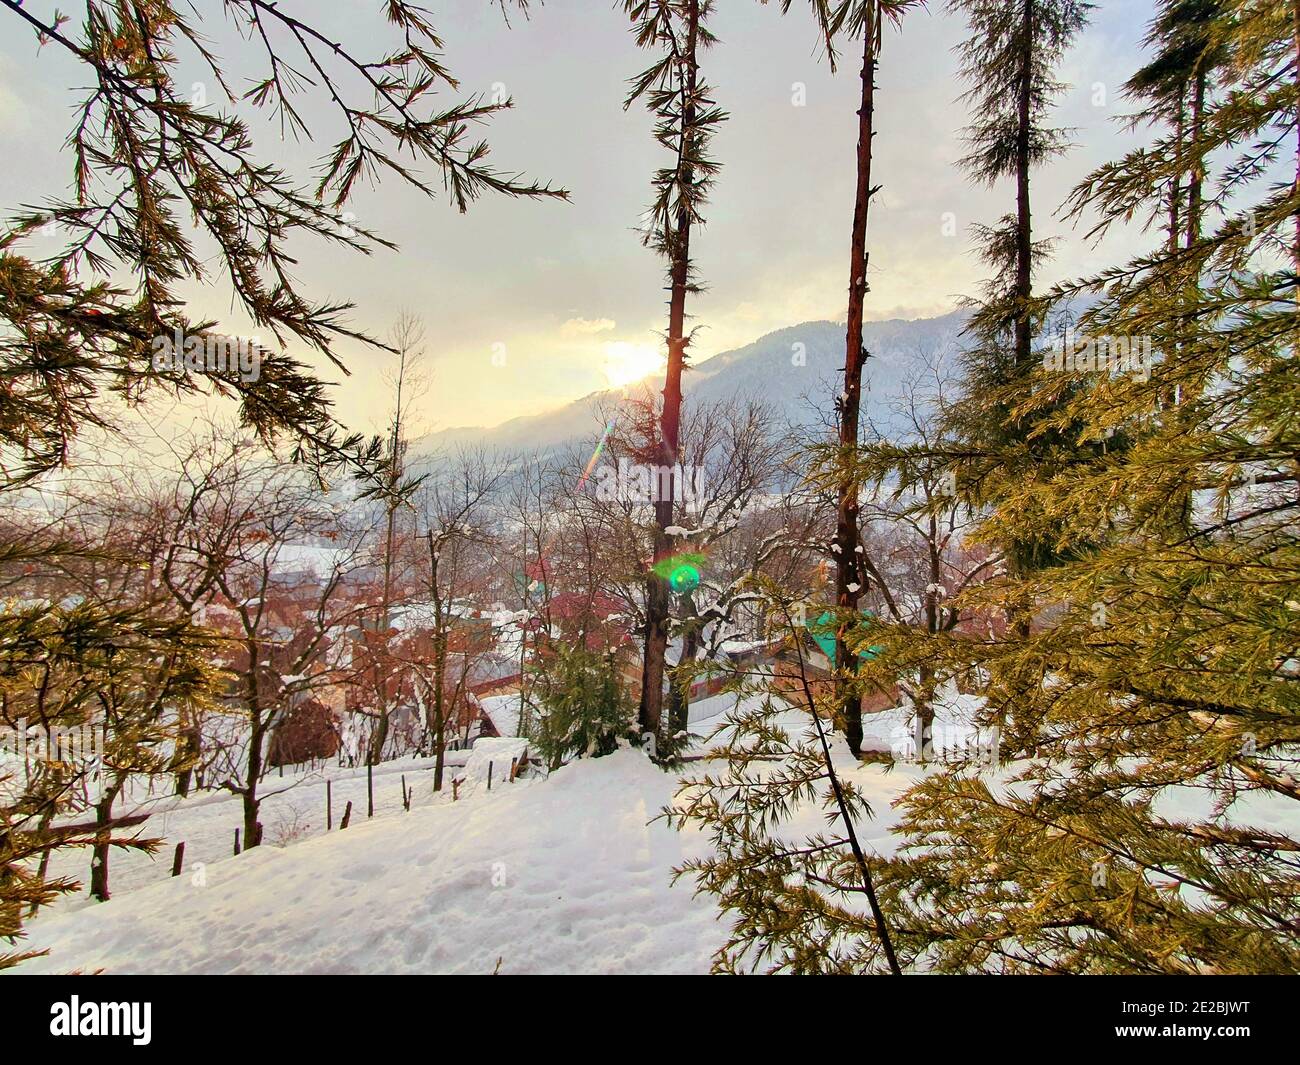 Snow fall in Jammu and Kashmir is common from December to February, snowing attracts tourists and winter games are also played on snow. Stock Photo